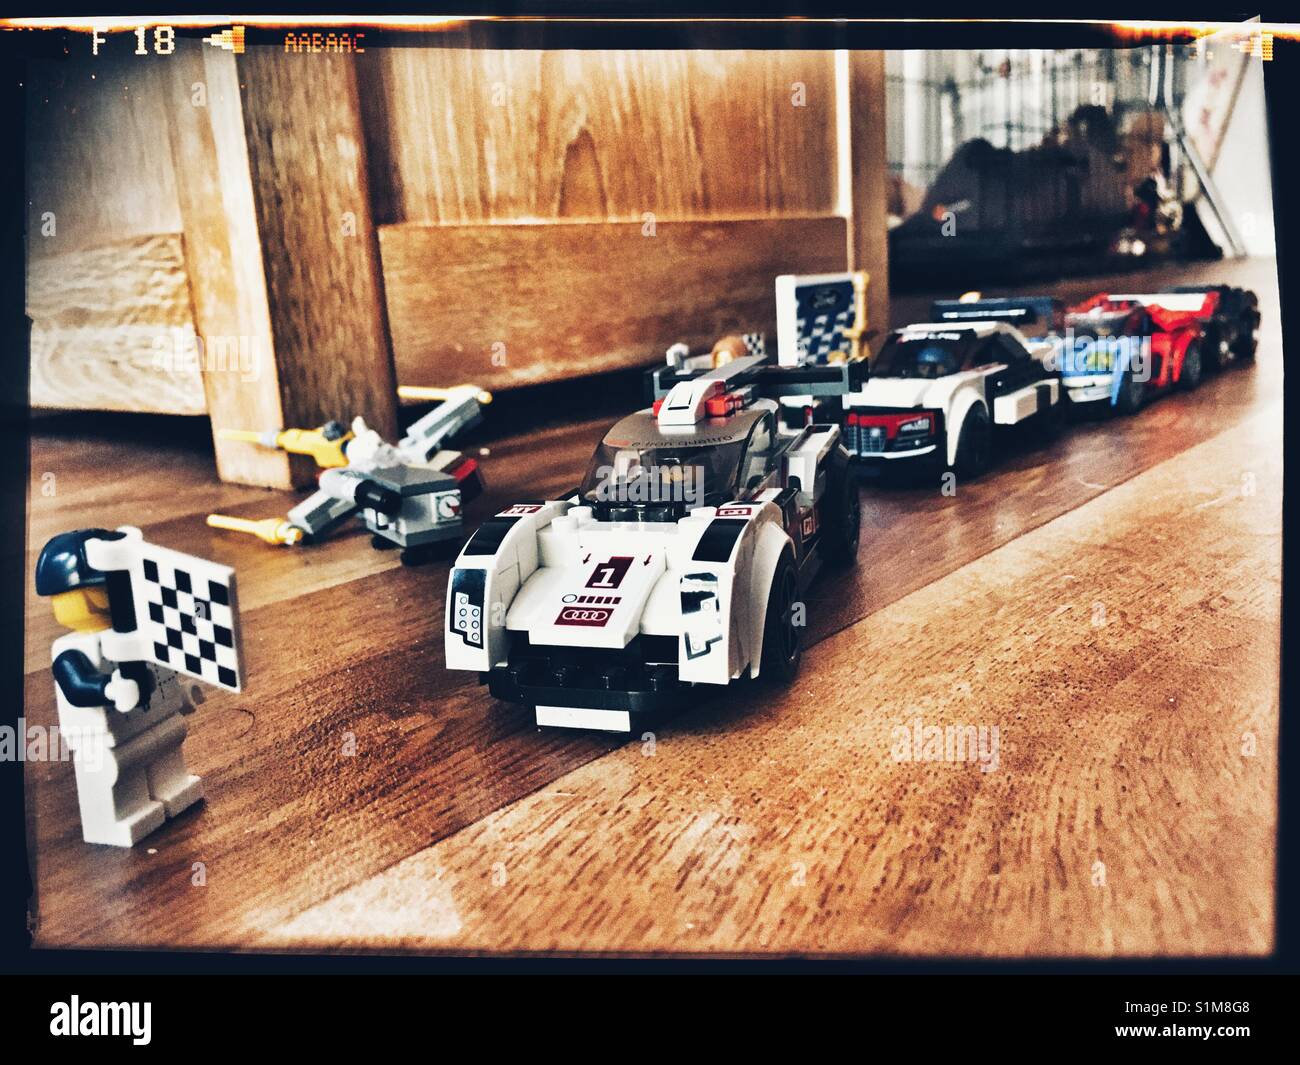 Lego racing cars lined up at the chequered flag. Stock Photo